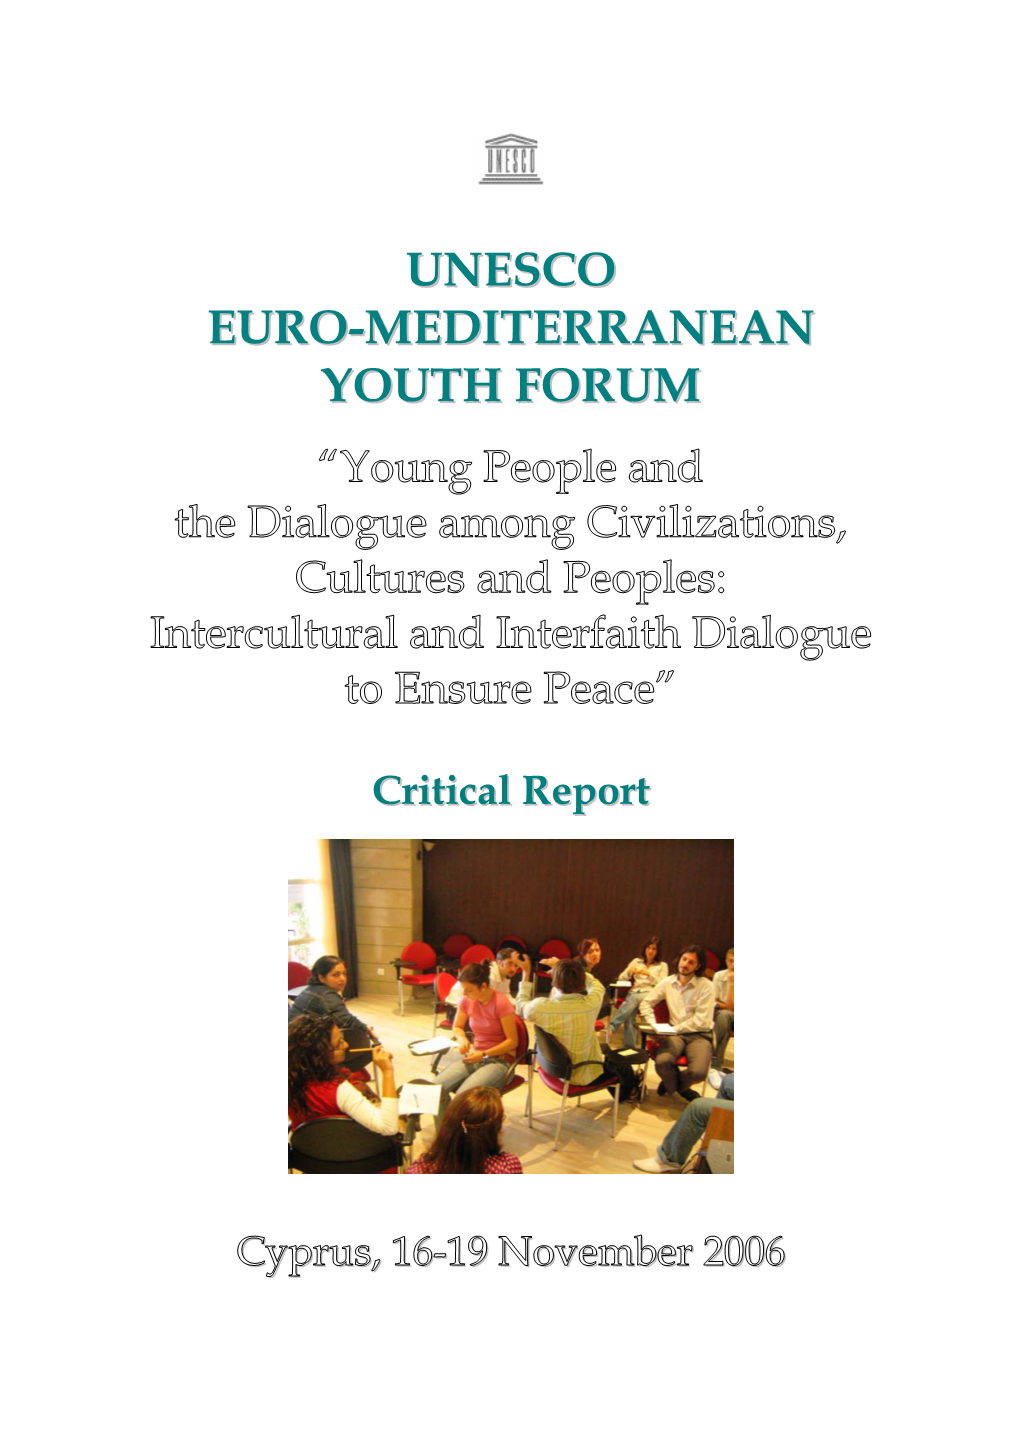 UNESSCO Euromed Youth Forum